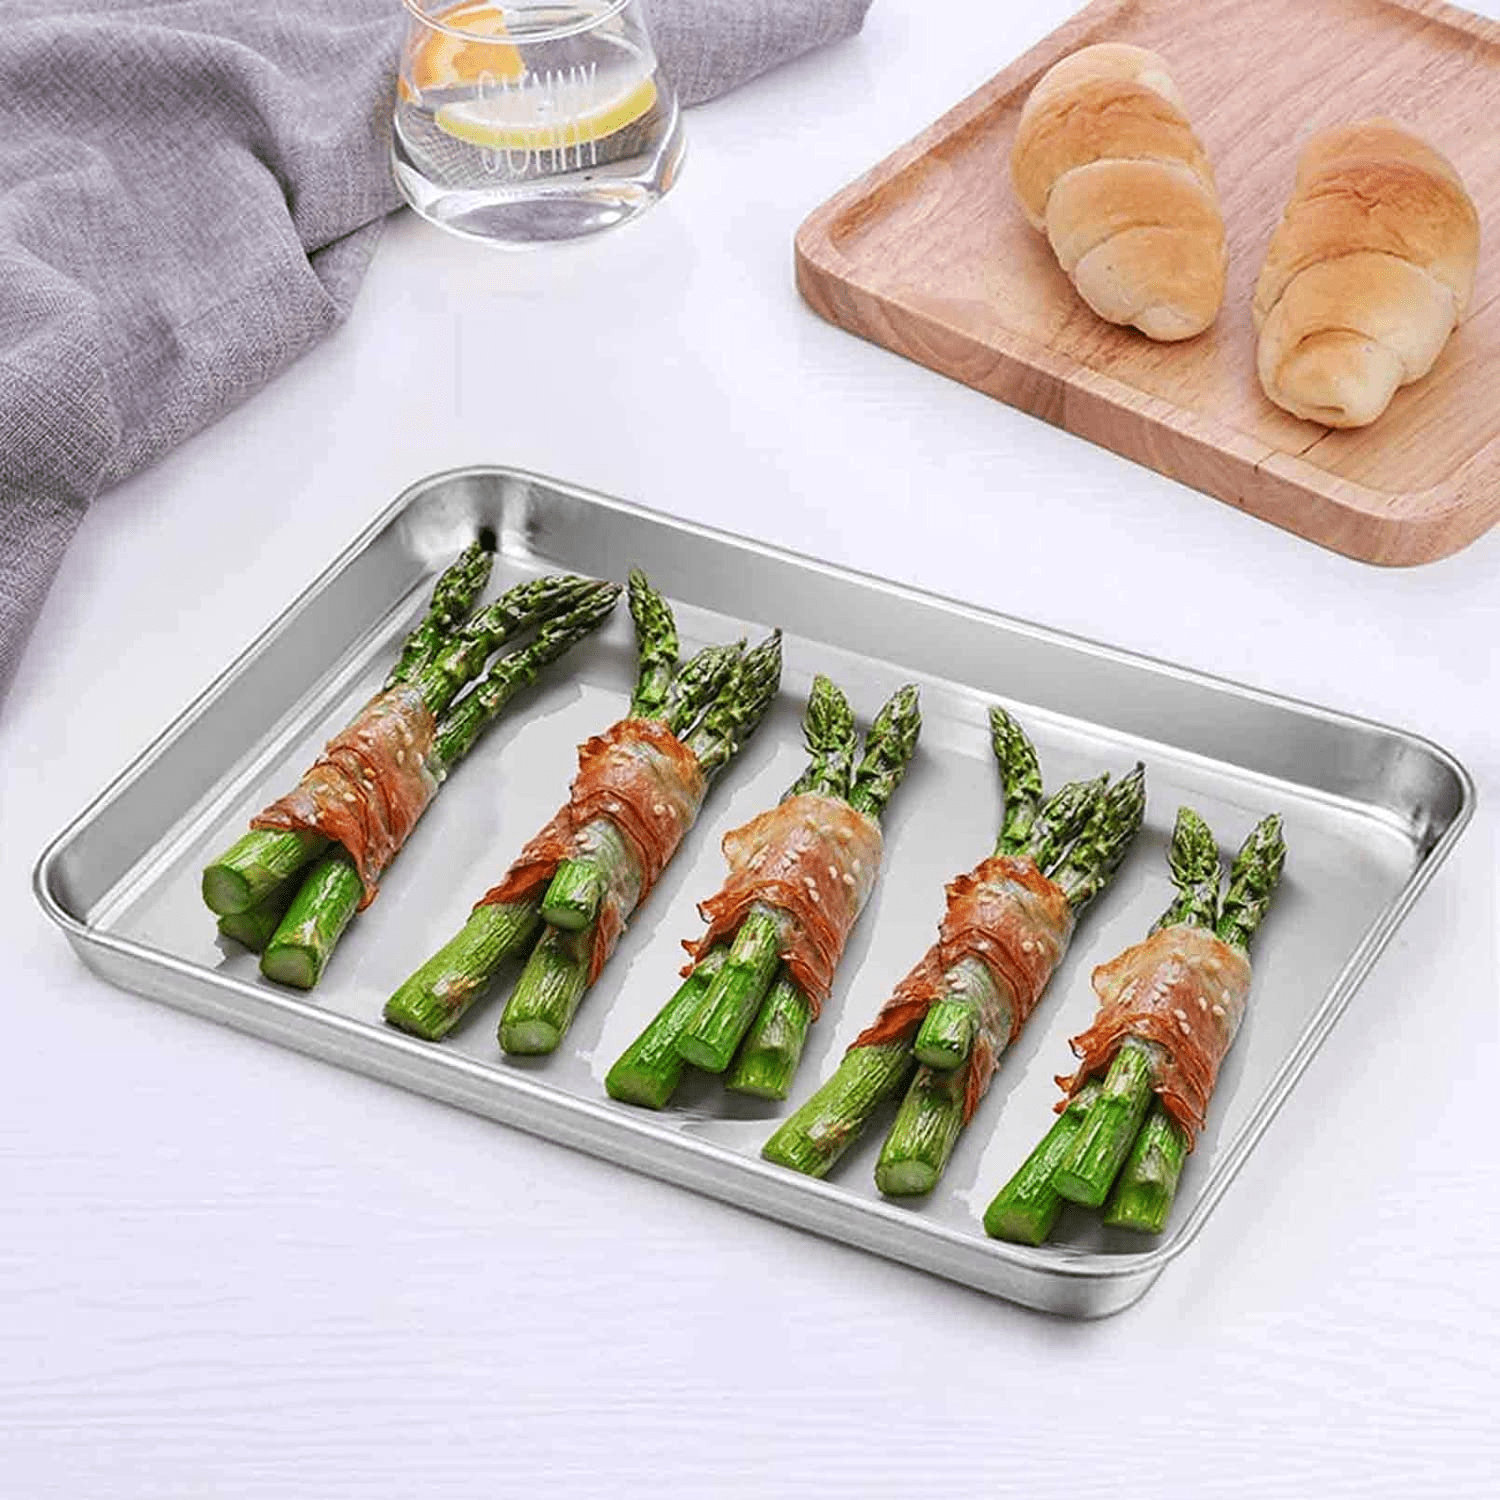 Small Baking Sheet 2 Pack, Walooza 8 inch Carbon Steel Half Toaster Oven Pan Tray Replacement, Heavy-Gauge Steel, Set of 2